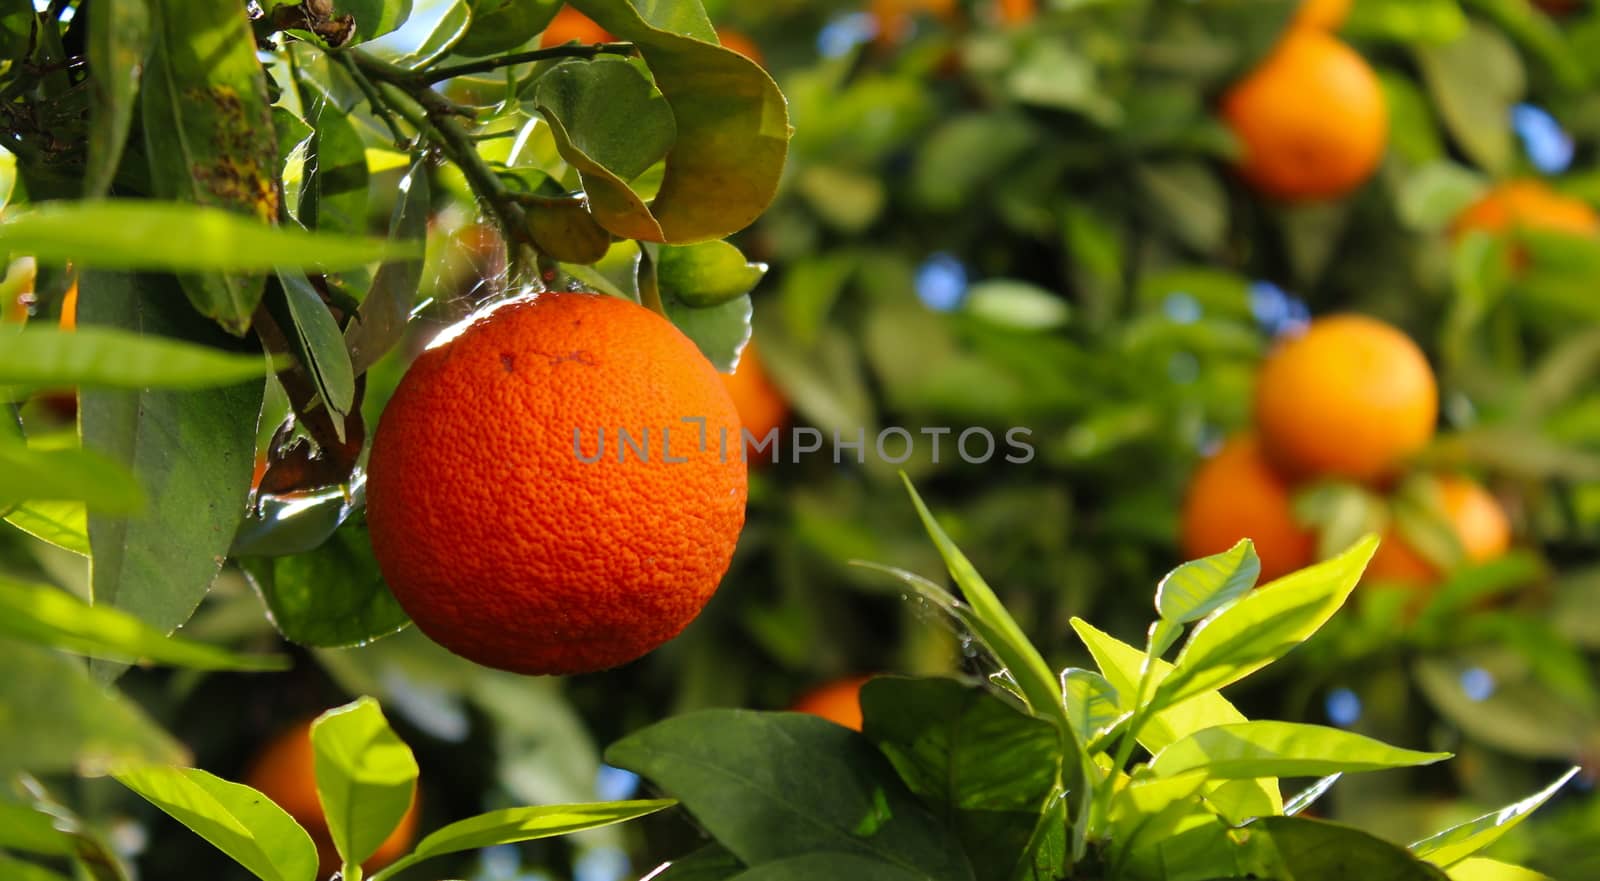 One ripe orange in focus and the other orange with leaves in the background. by mahirrov